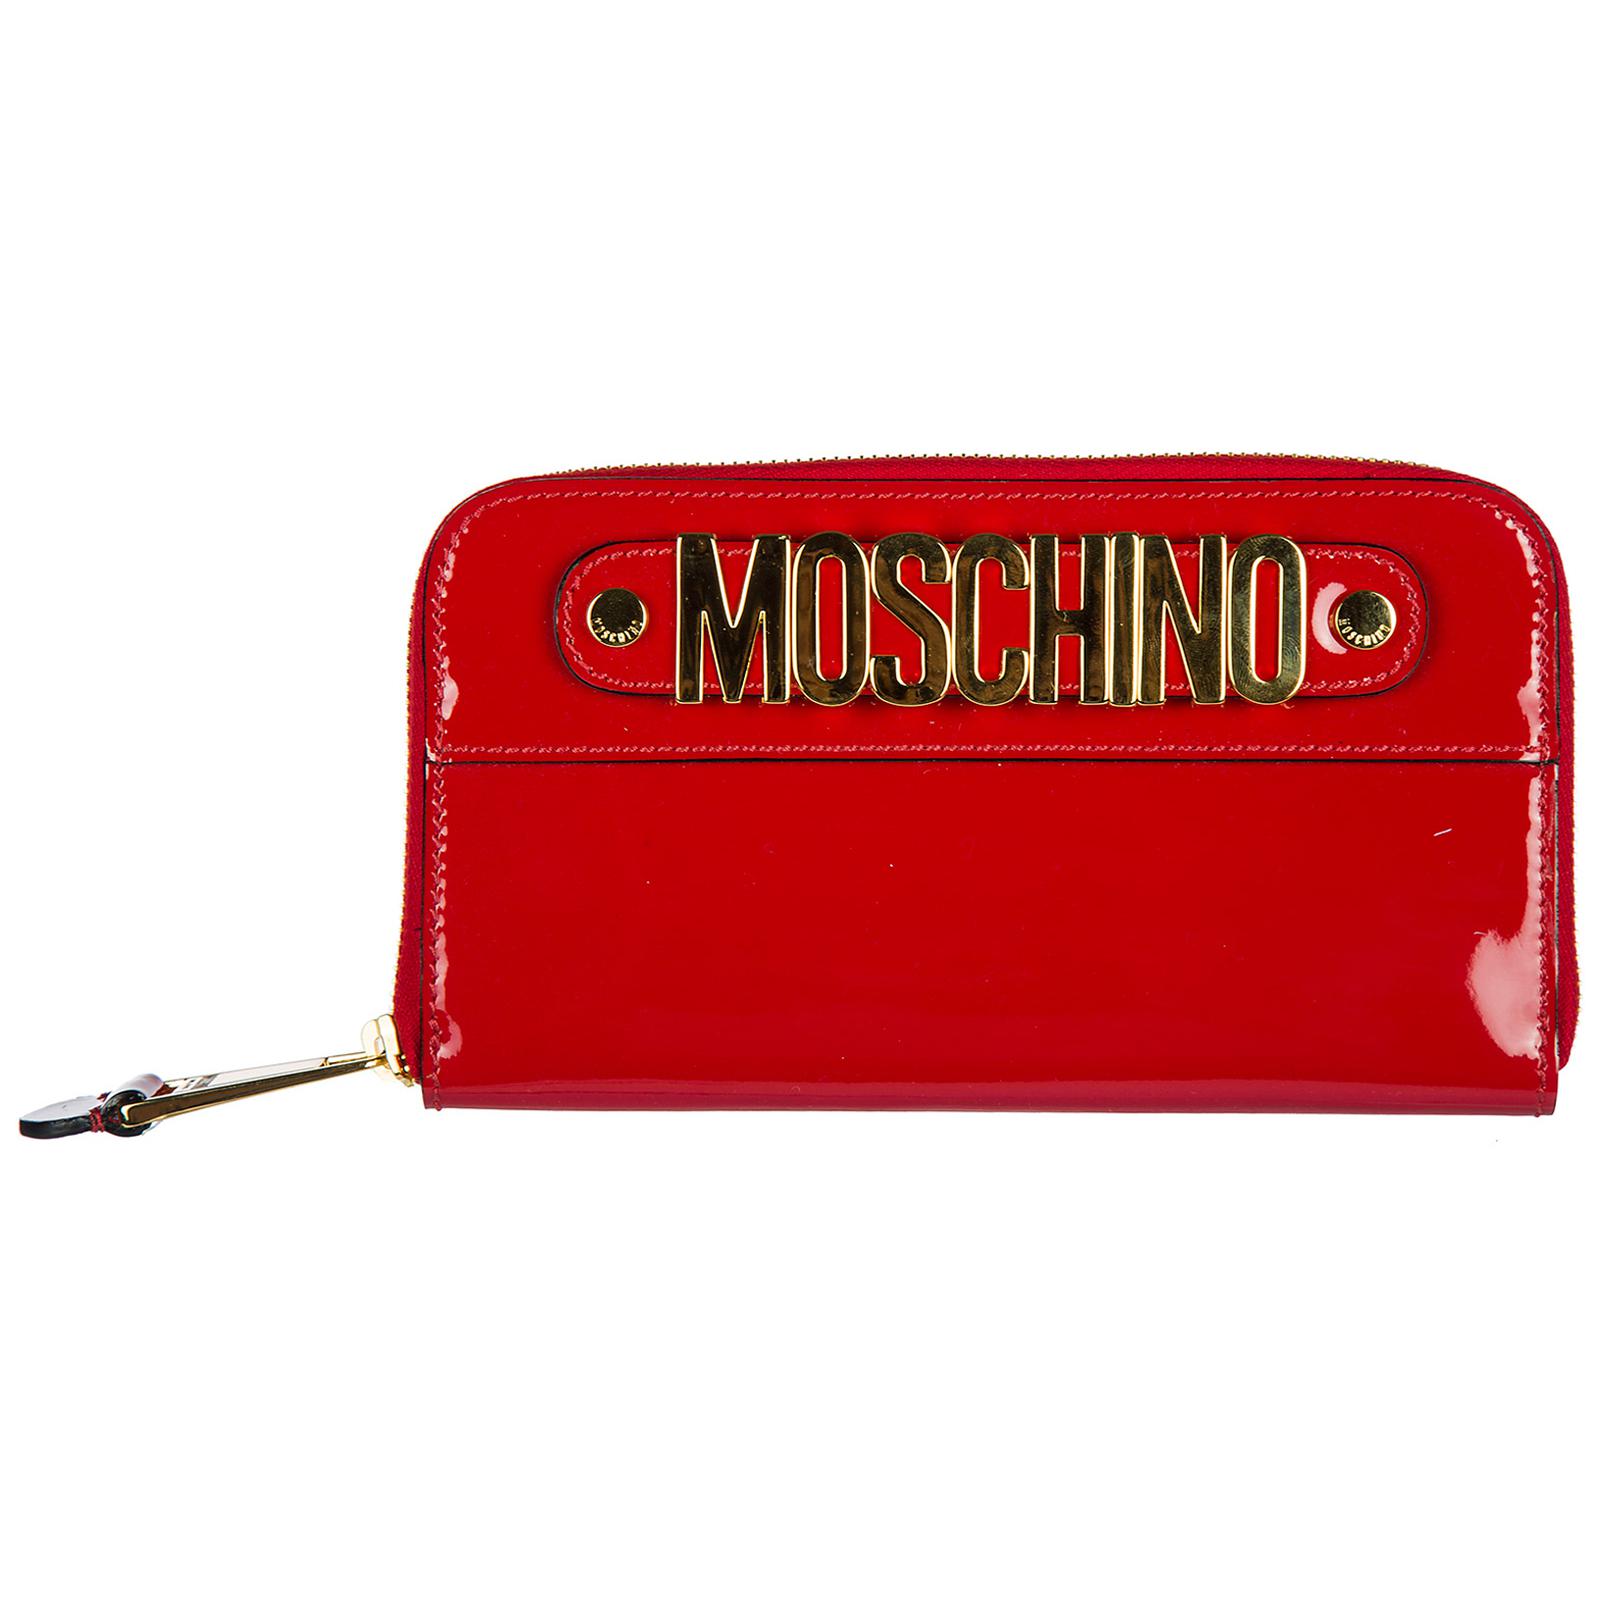 Moschino Wallet Genuine Leather Coin Case Holder Purse Card Bifold in ...